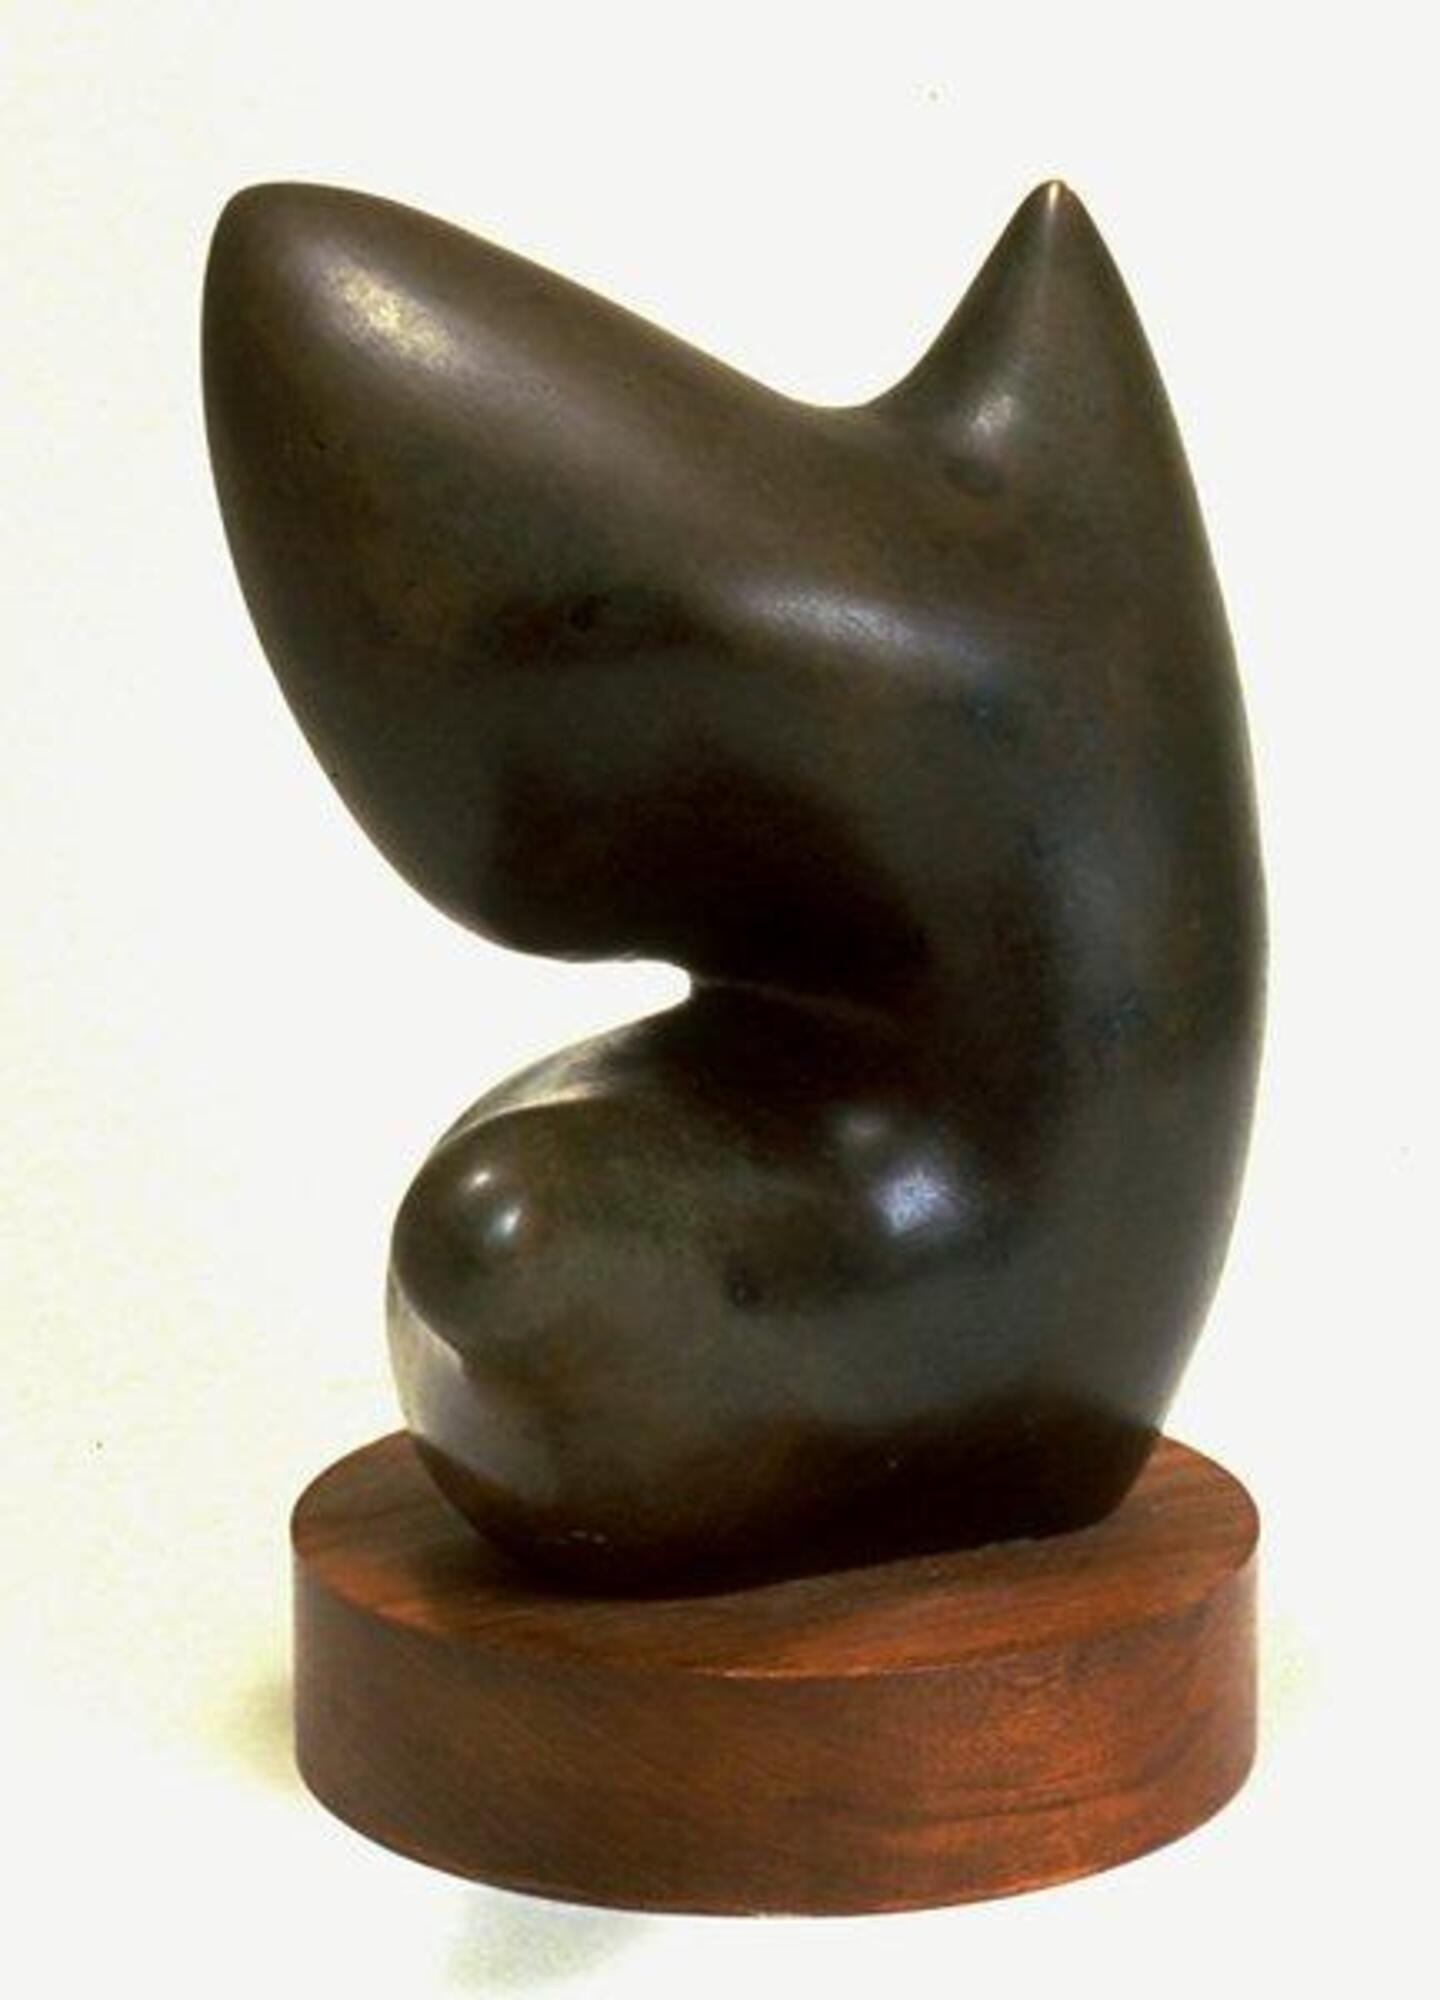 A biomorphically abstract sculpture of bronze. Bulbous at the bottom, the shape stretches and narrows in the middle and then expands into a larger shape from which two rounded points rise.